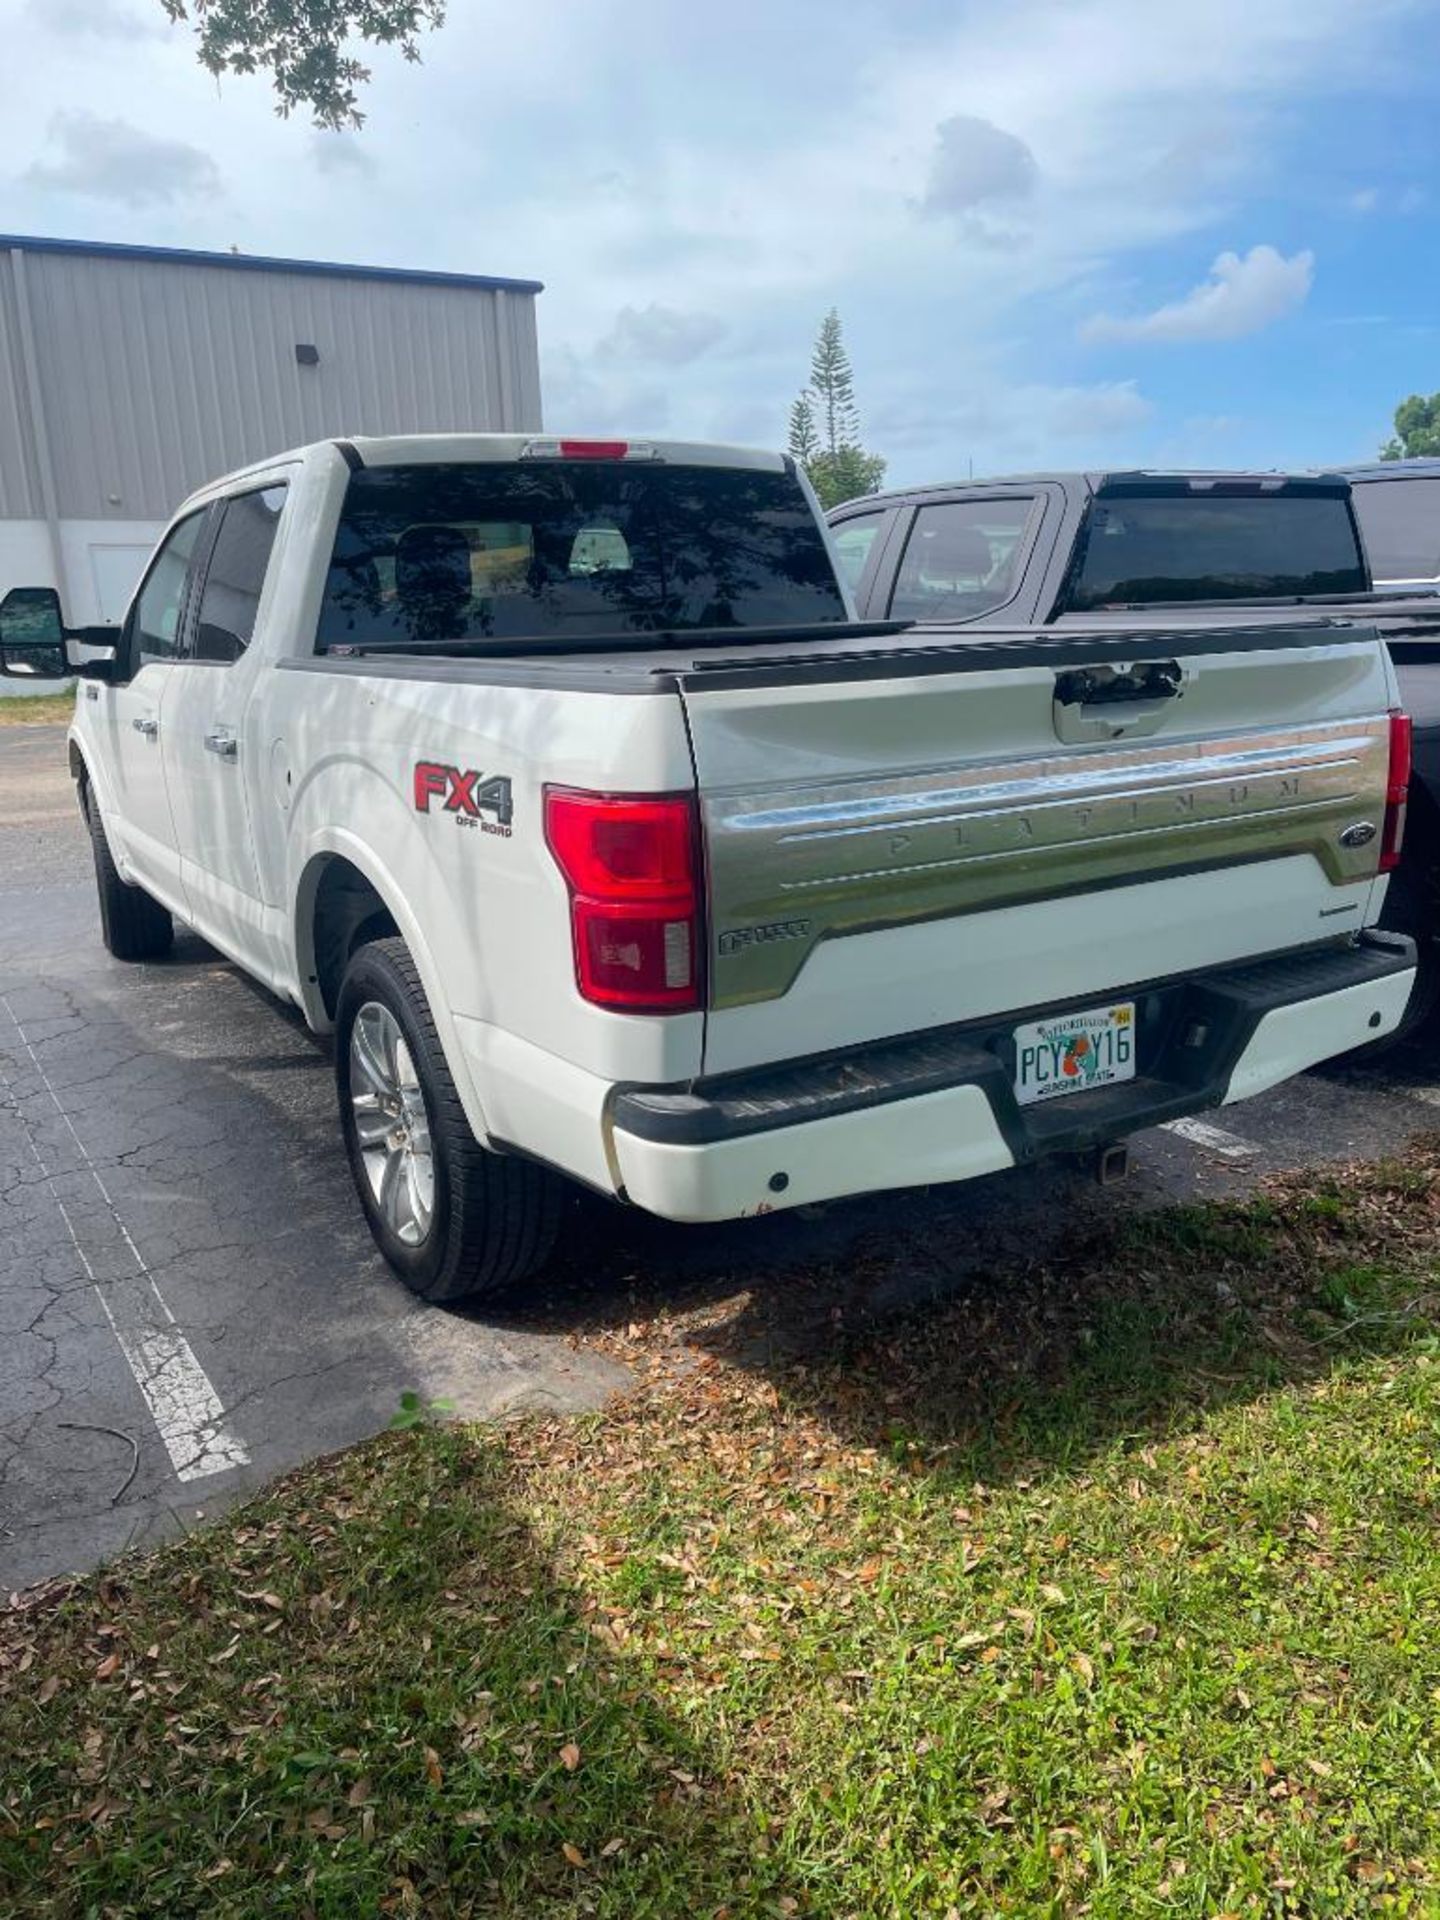 2020 Ford F-150 Plat 4WD Super Crew V6 Turbo, Gas, License# PCY-Y16, VIN 1FTEW1E42LFB28361, 77,200 M - Image 4 of 15